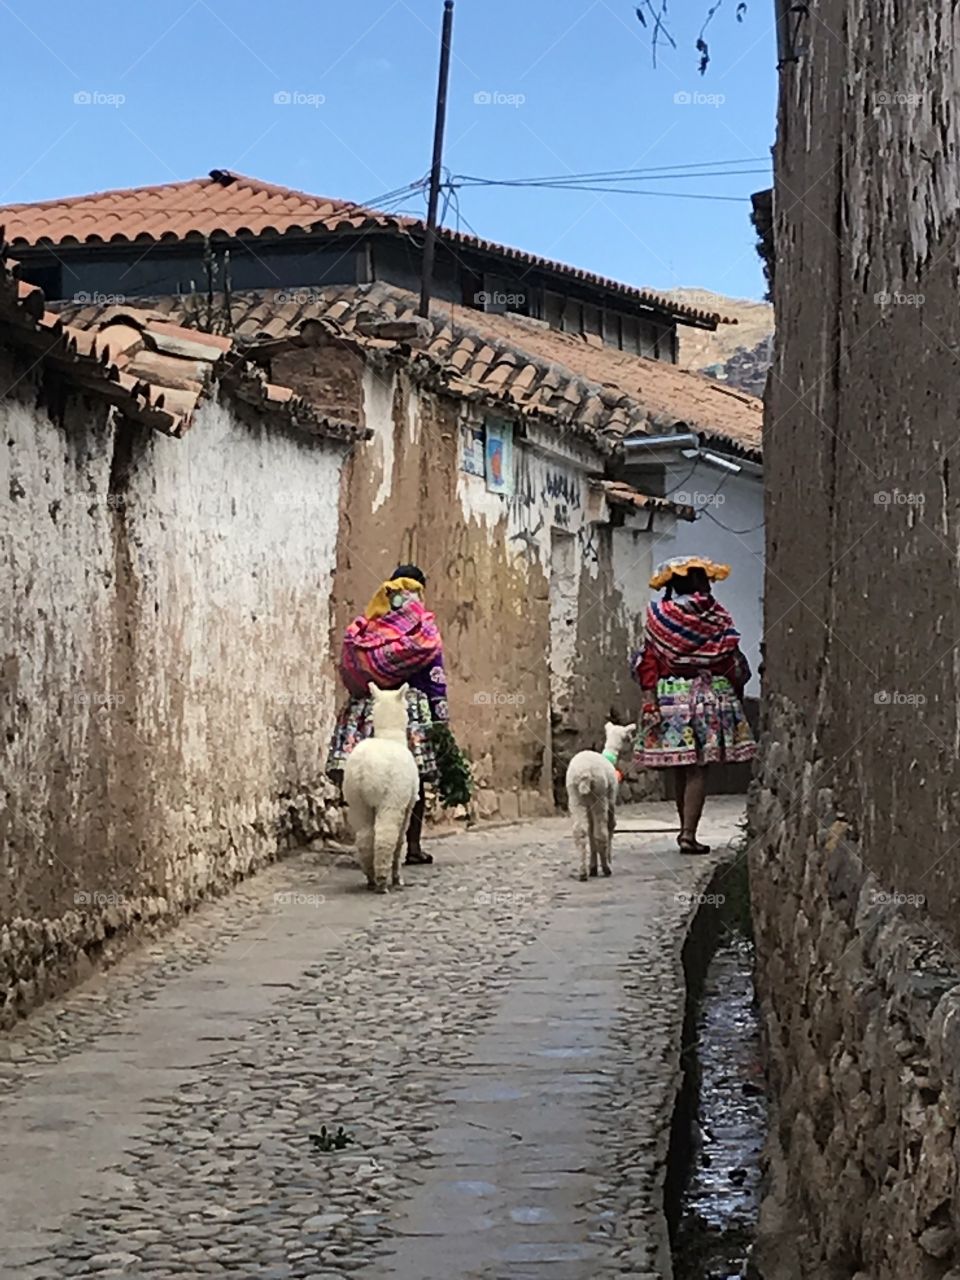 Ladies and their llamas go for a stroll and the gorgeous backstreets of Cusco, Peru.